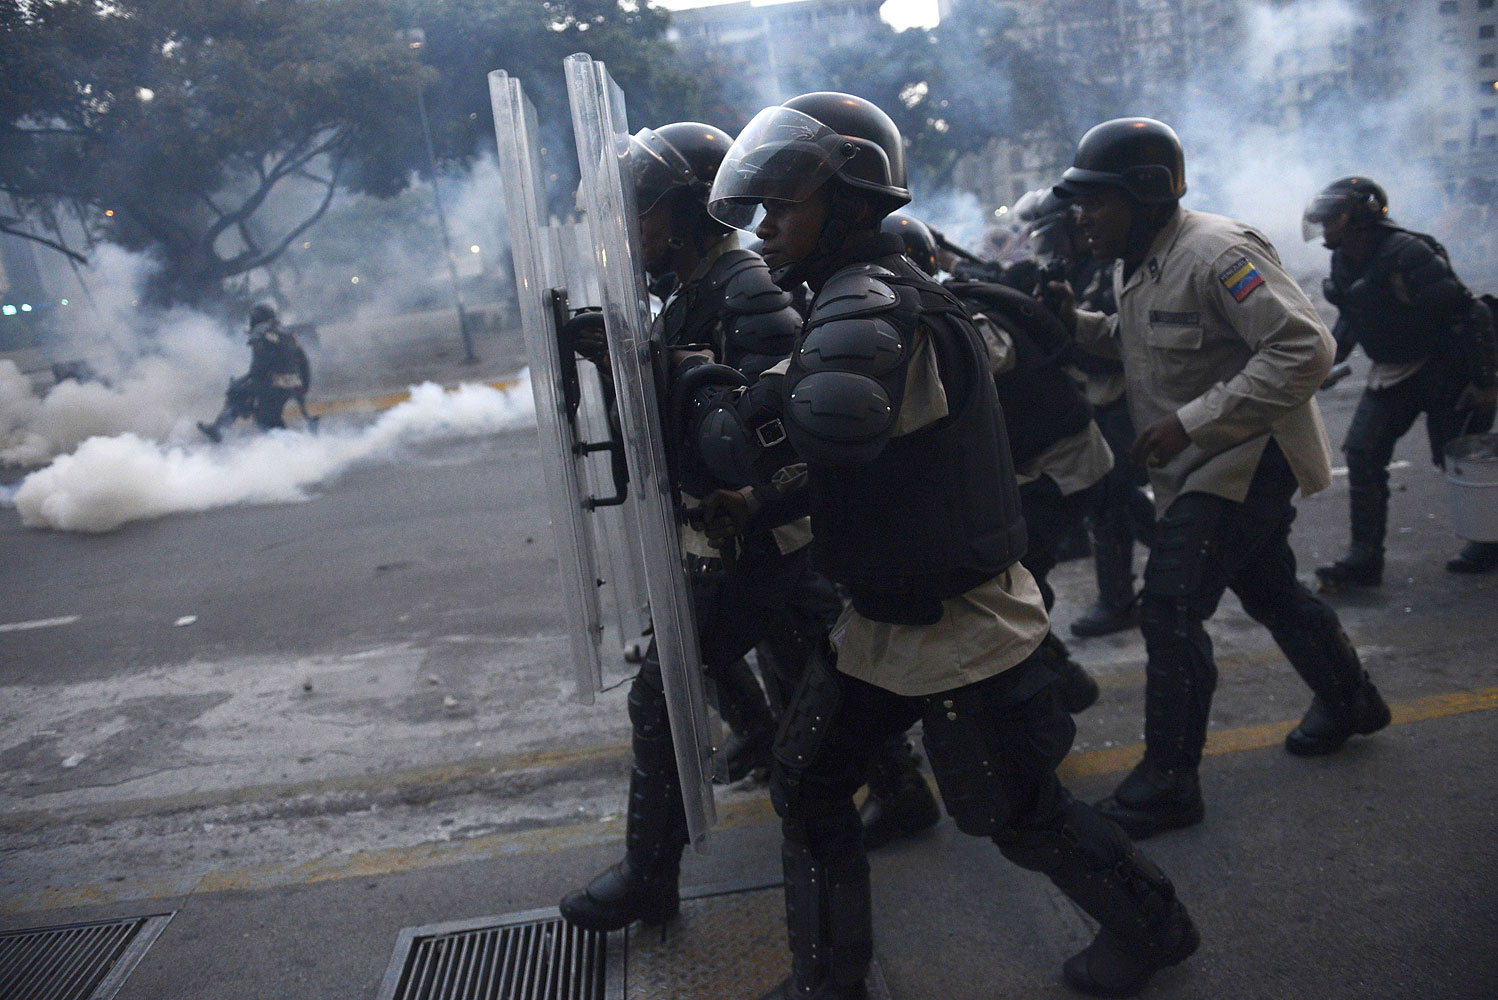 Riot police clash with opponents of Venezuelan President Nicolas Maduro during an anti-government protest in Caracas on Feb. 27, 2014.